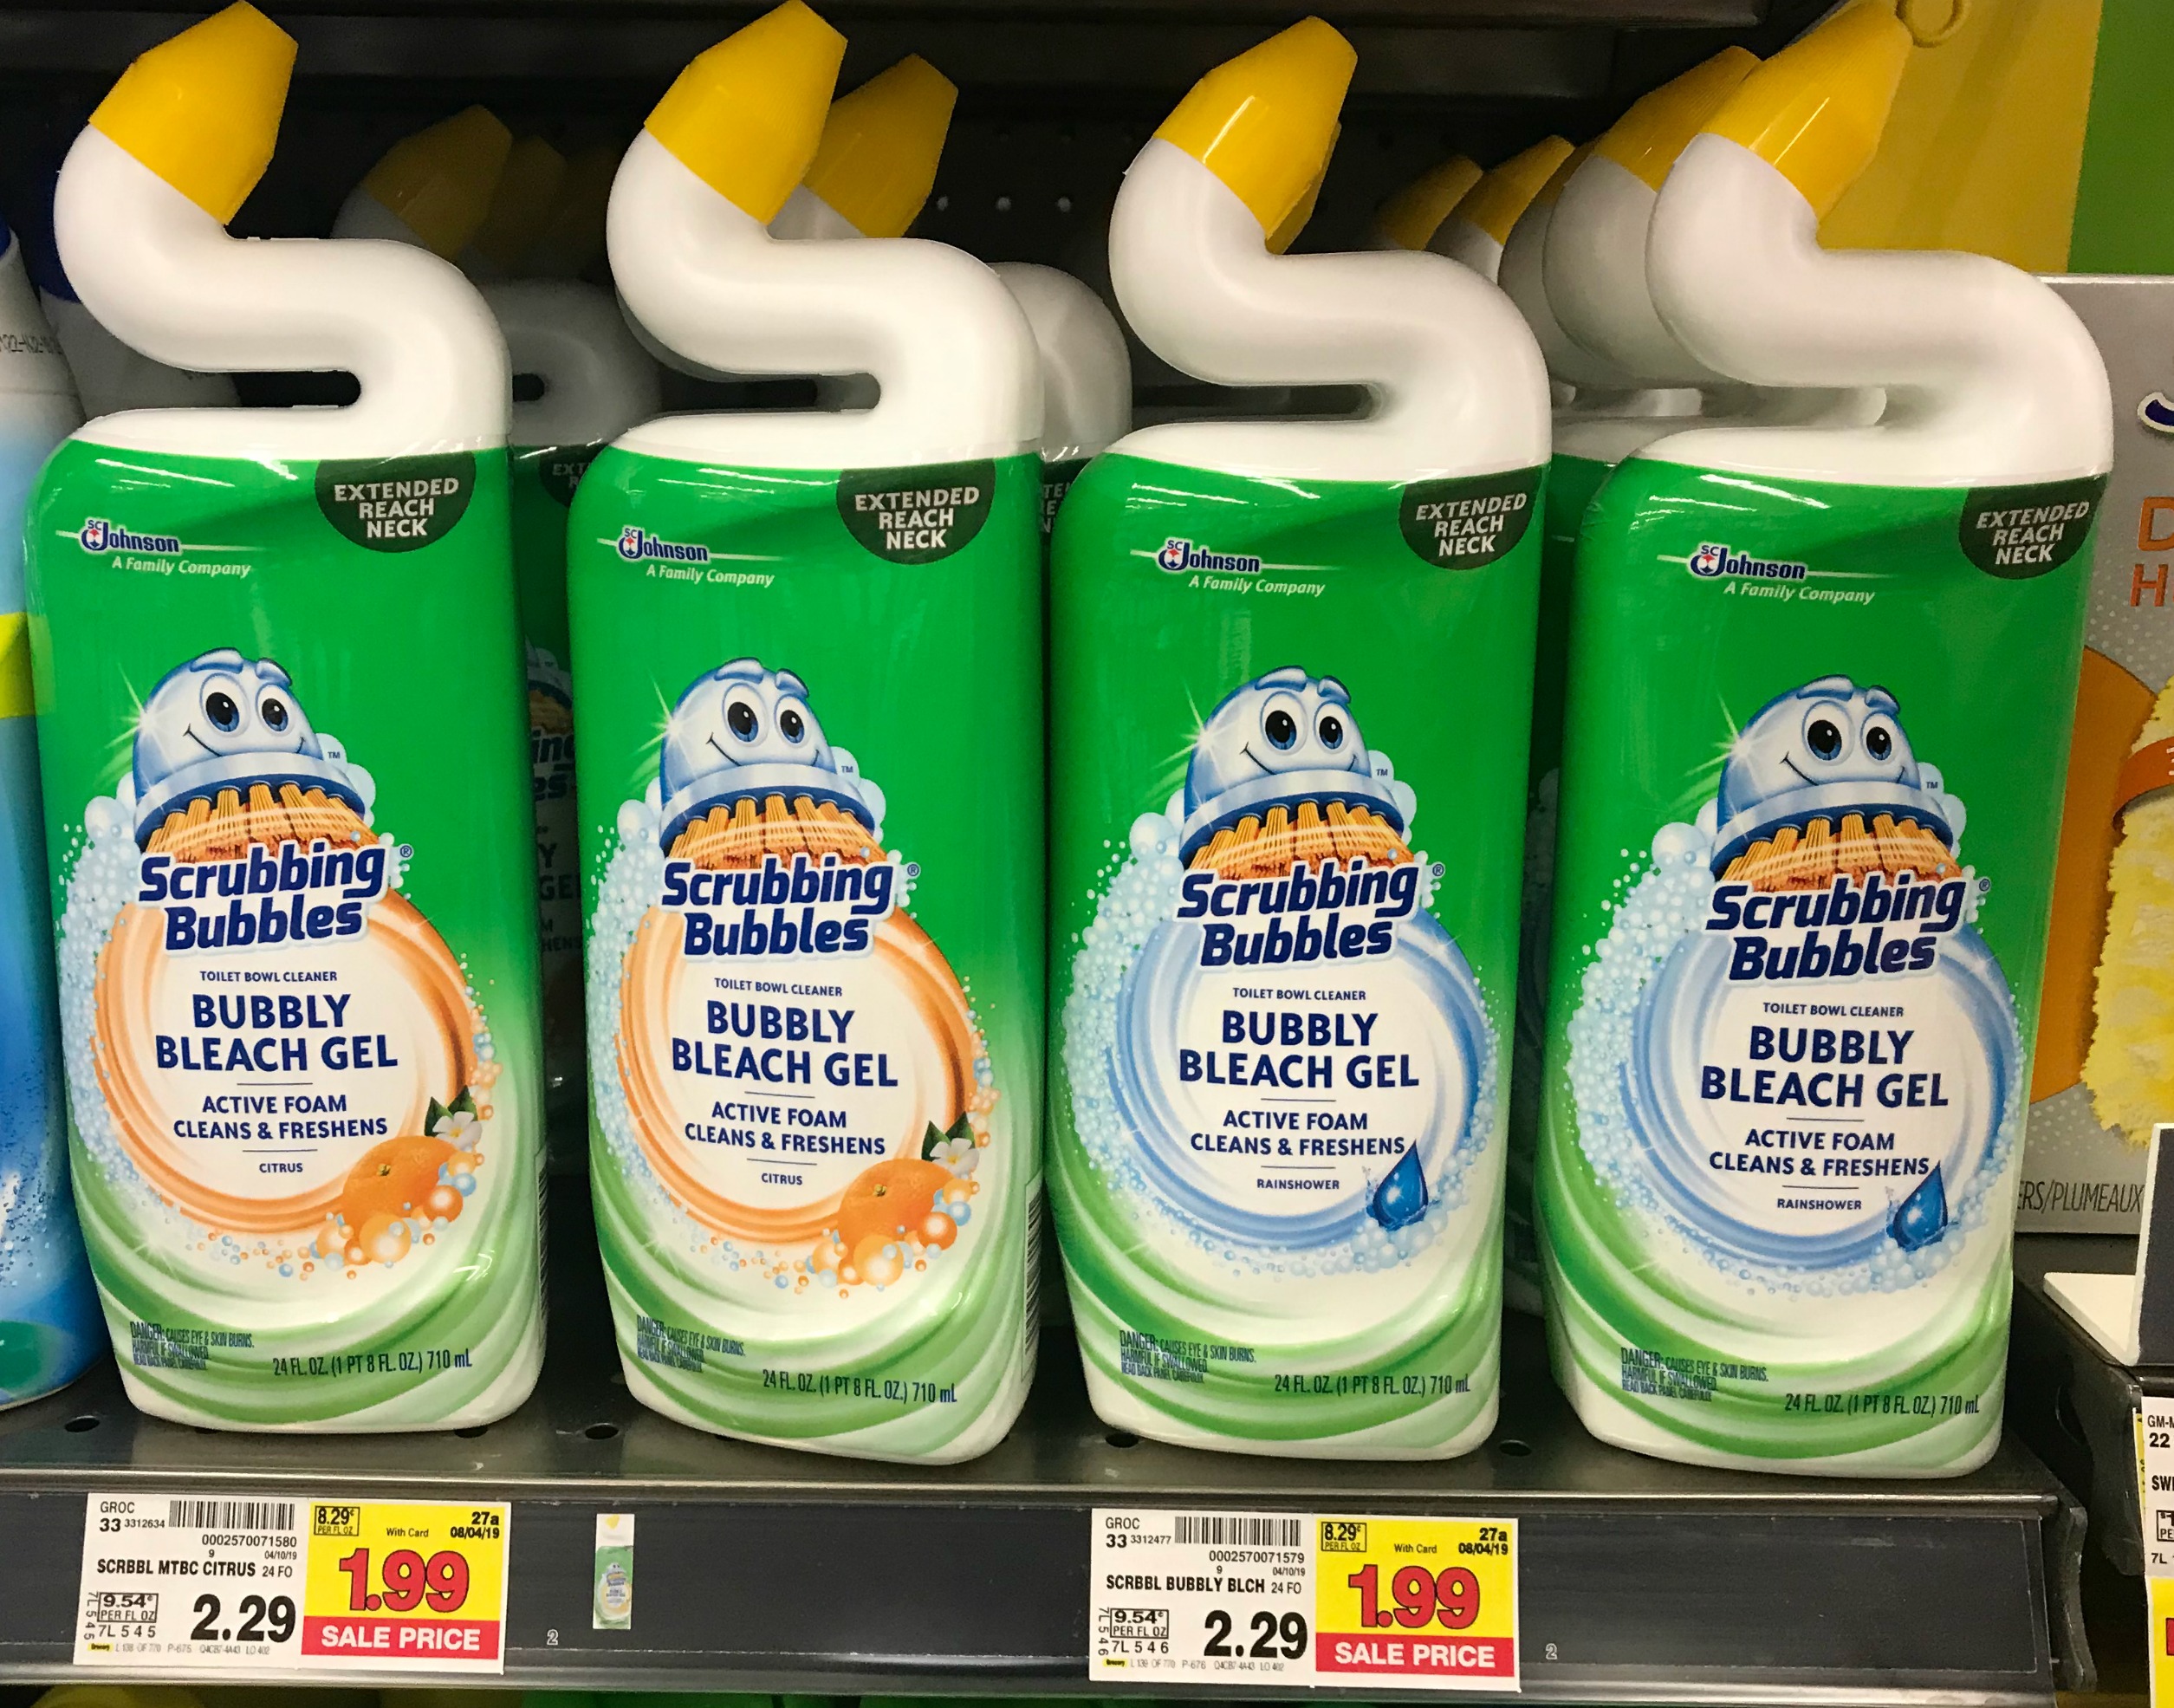 Scrubbing Bubbles Toilet Bowl Cleaner ONLY 1.24 at Kroger